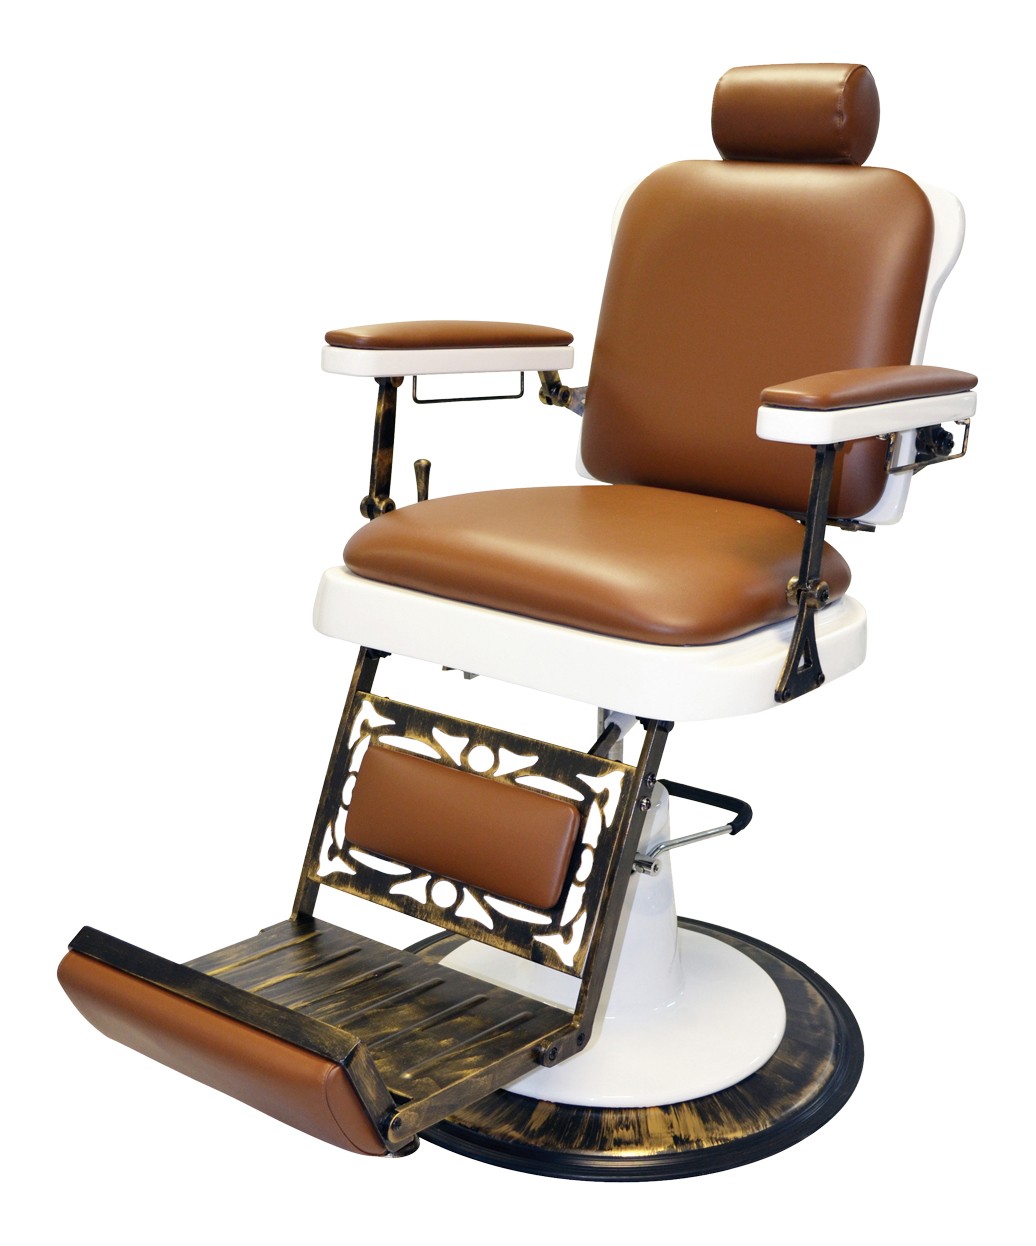 Classic & Antique Barber Chair: Pibbs 662 King Barber Chair